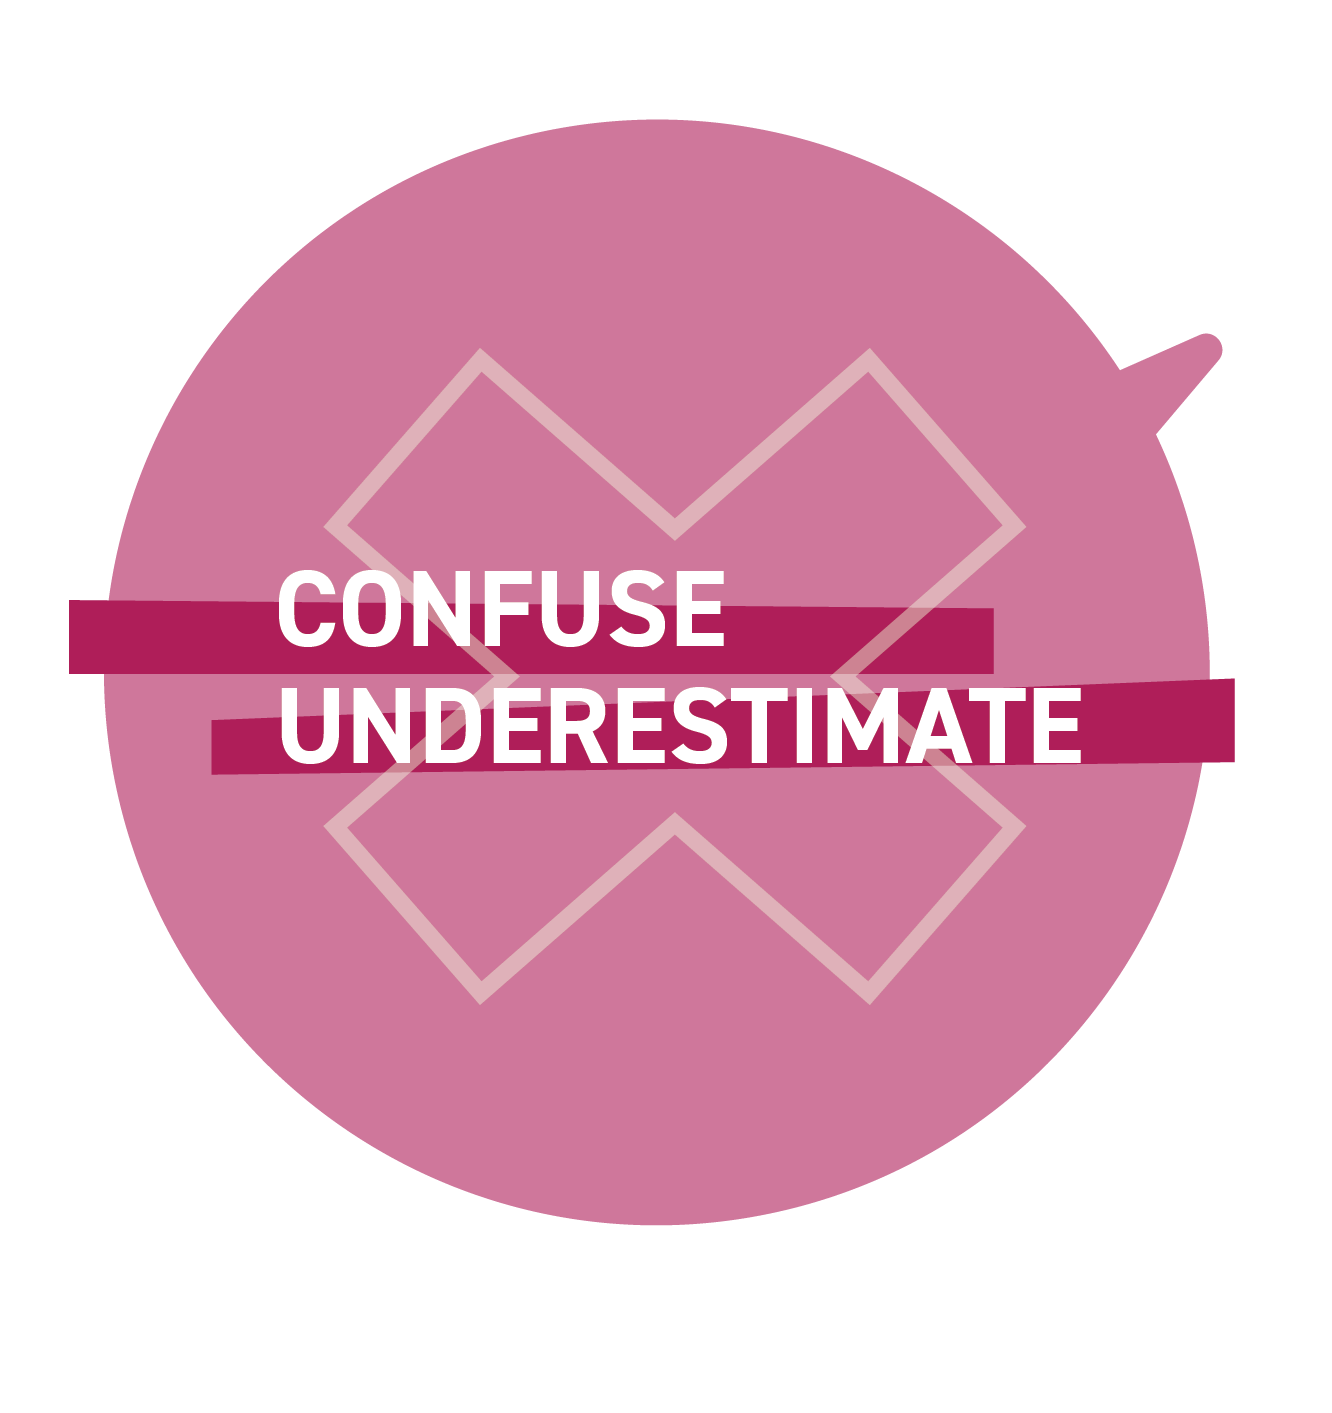 Don't: Confuse, underestimate